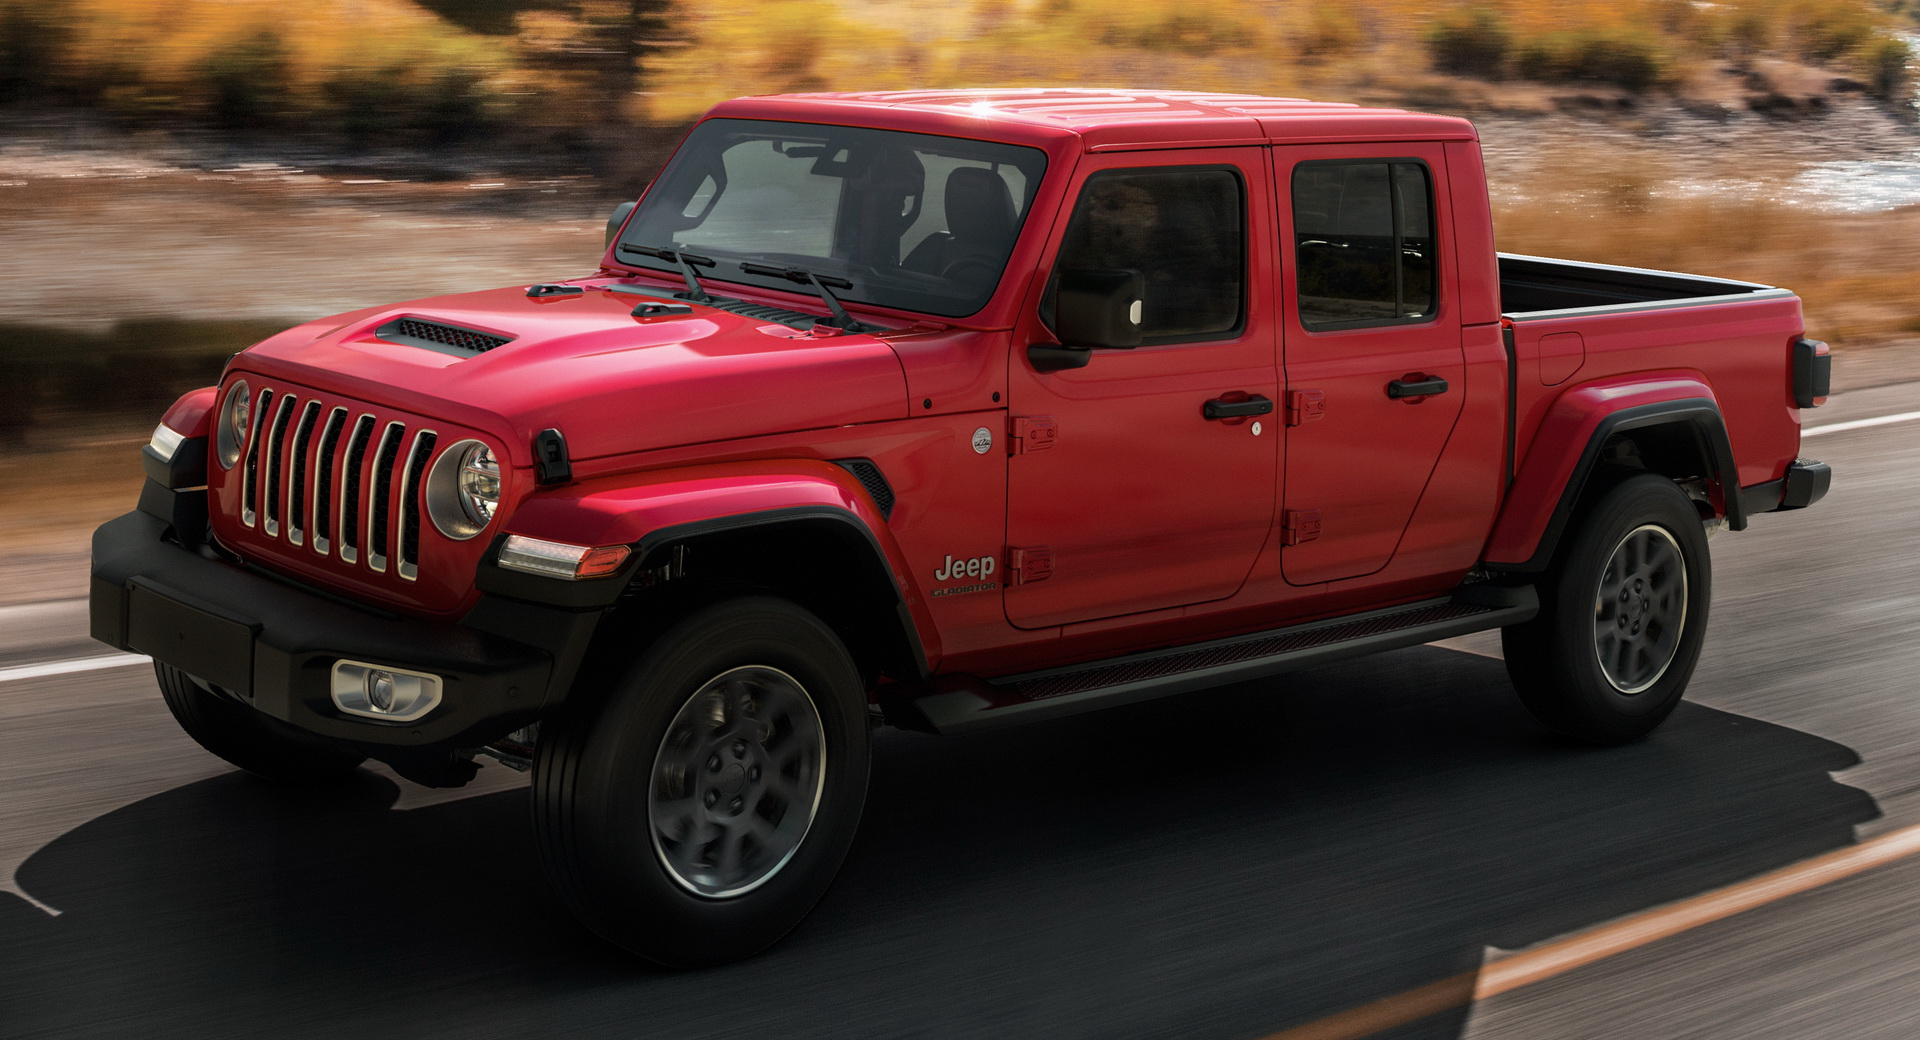 2023 Jeep Gladiator: Whatâ€™s new this year?